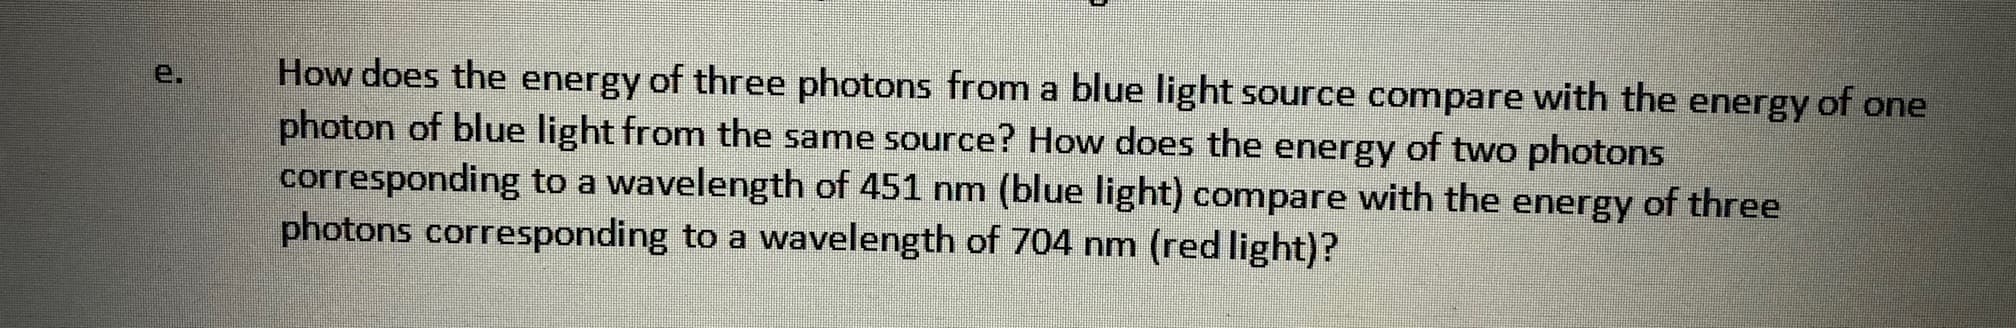 How does the energy of three photons from a blue light source compare with the energy of one
photon of blue light from the same source? How does the energy of two photons
corresponding to a wavelength of 451 nm (blue light) compare with the energy of three
photons corresponding to a wavelength of 704 nm (red light)?
